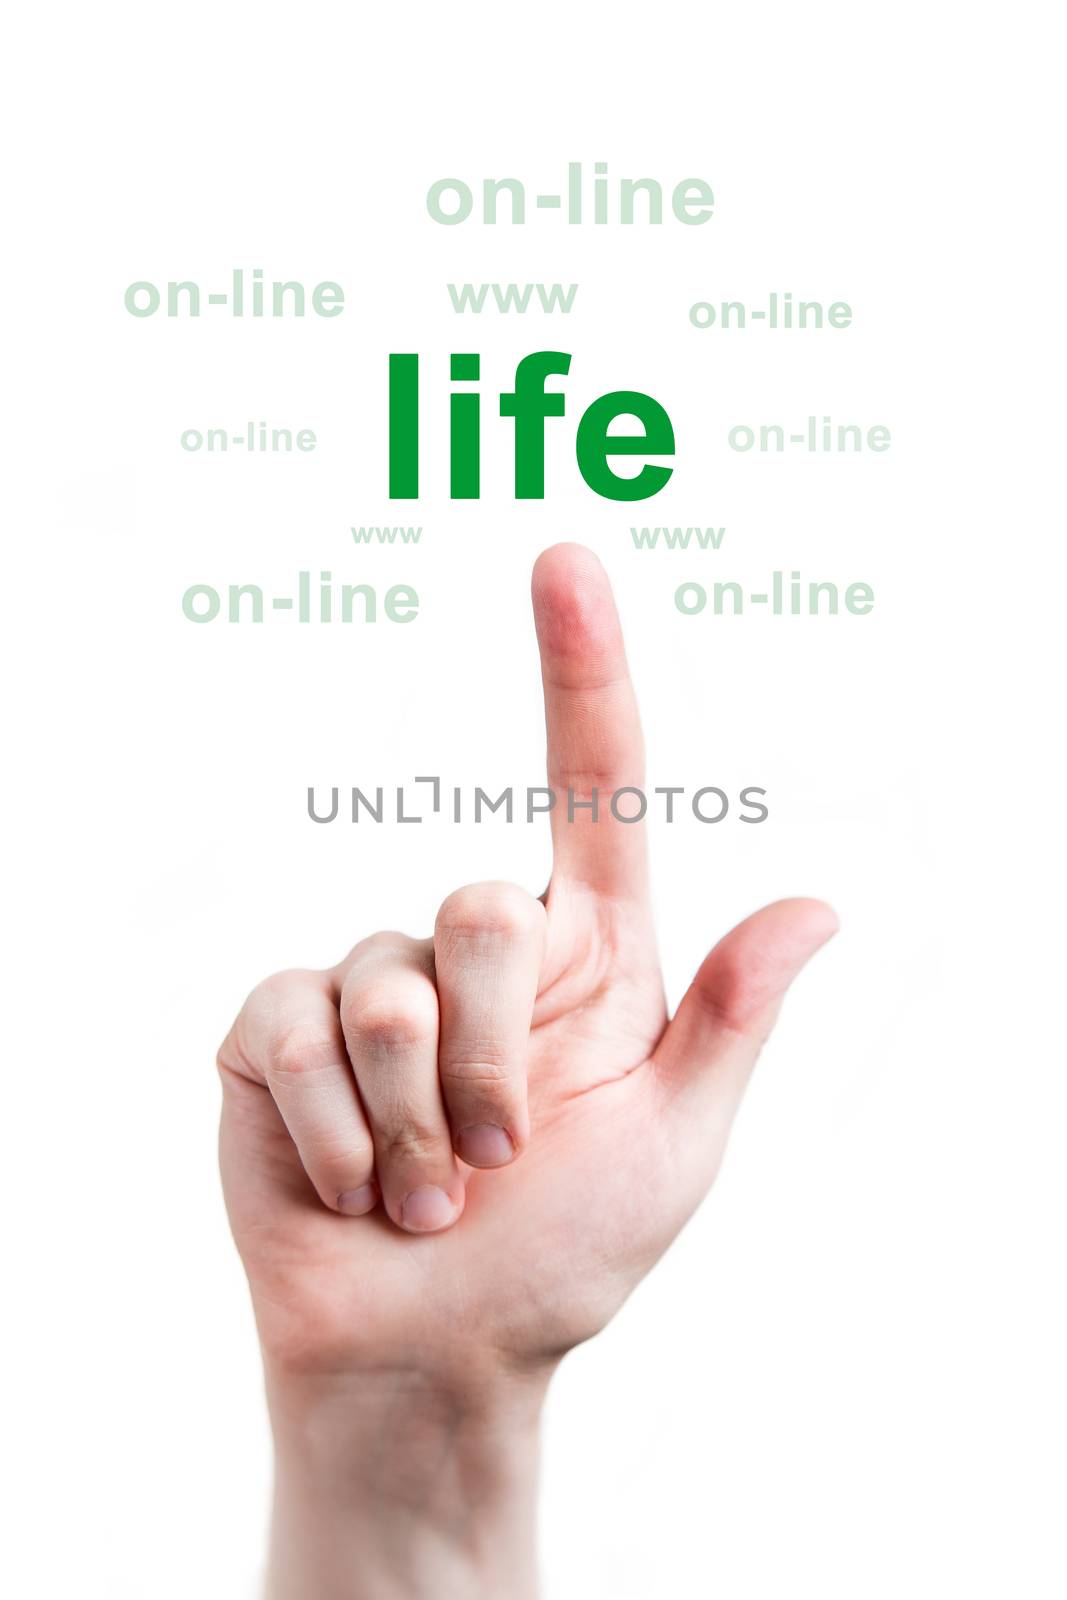 Online network life by MichalLudwiczak